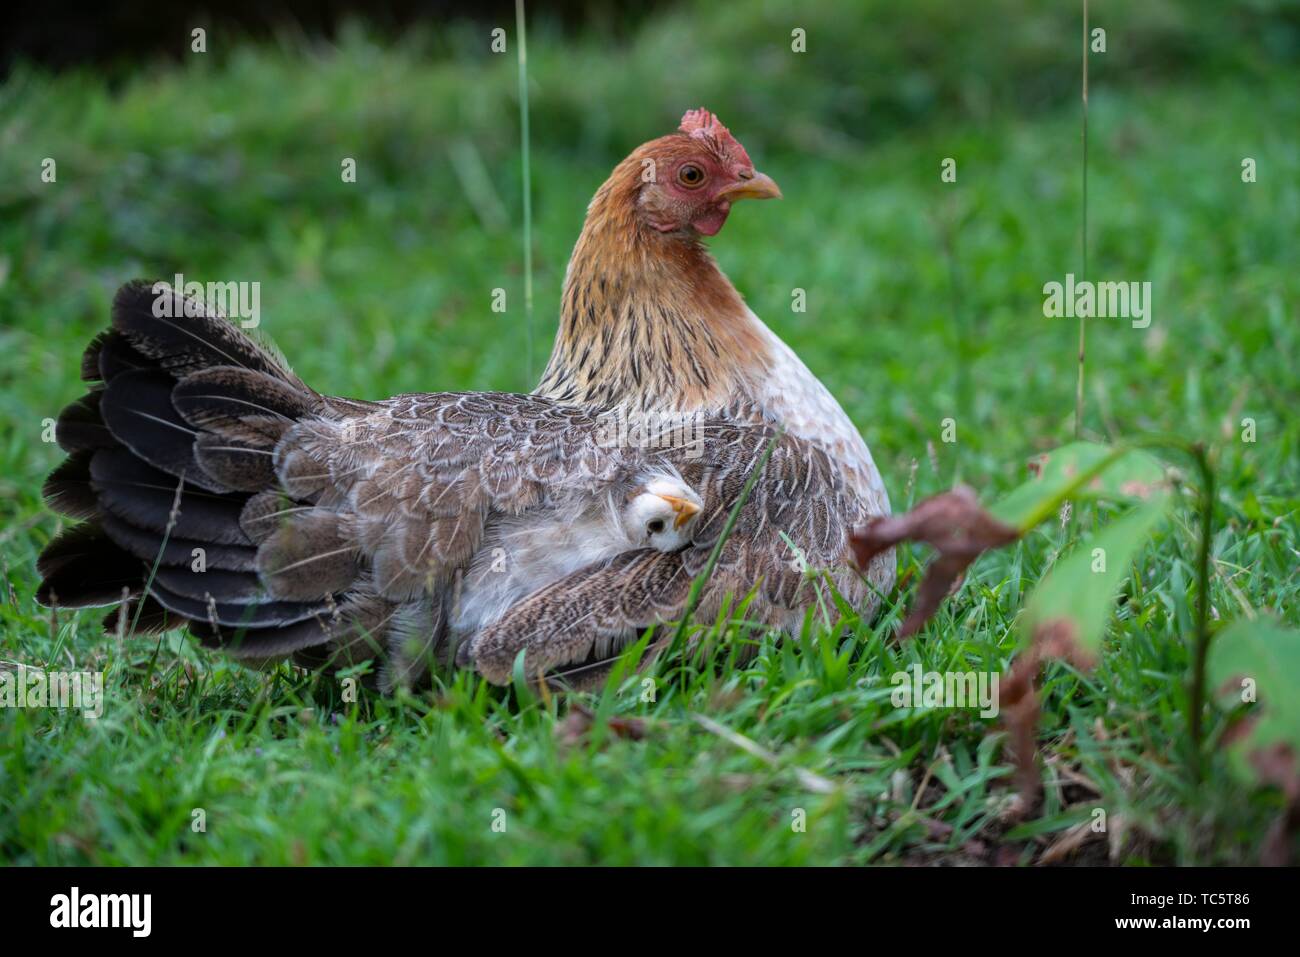 Small chick under mother's wing for warmth and protection in Kunmai Ban Suan Resort, Thaton, Thailand Stock Photo